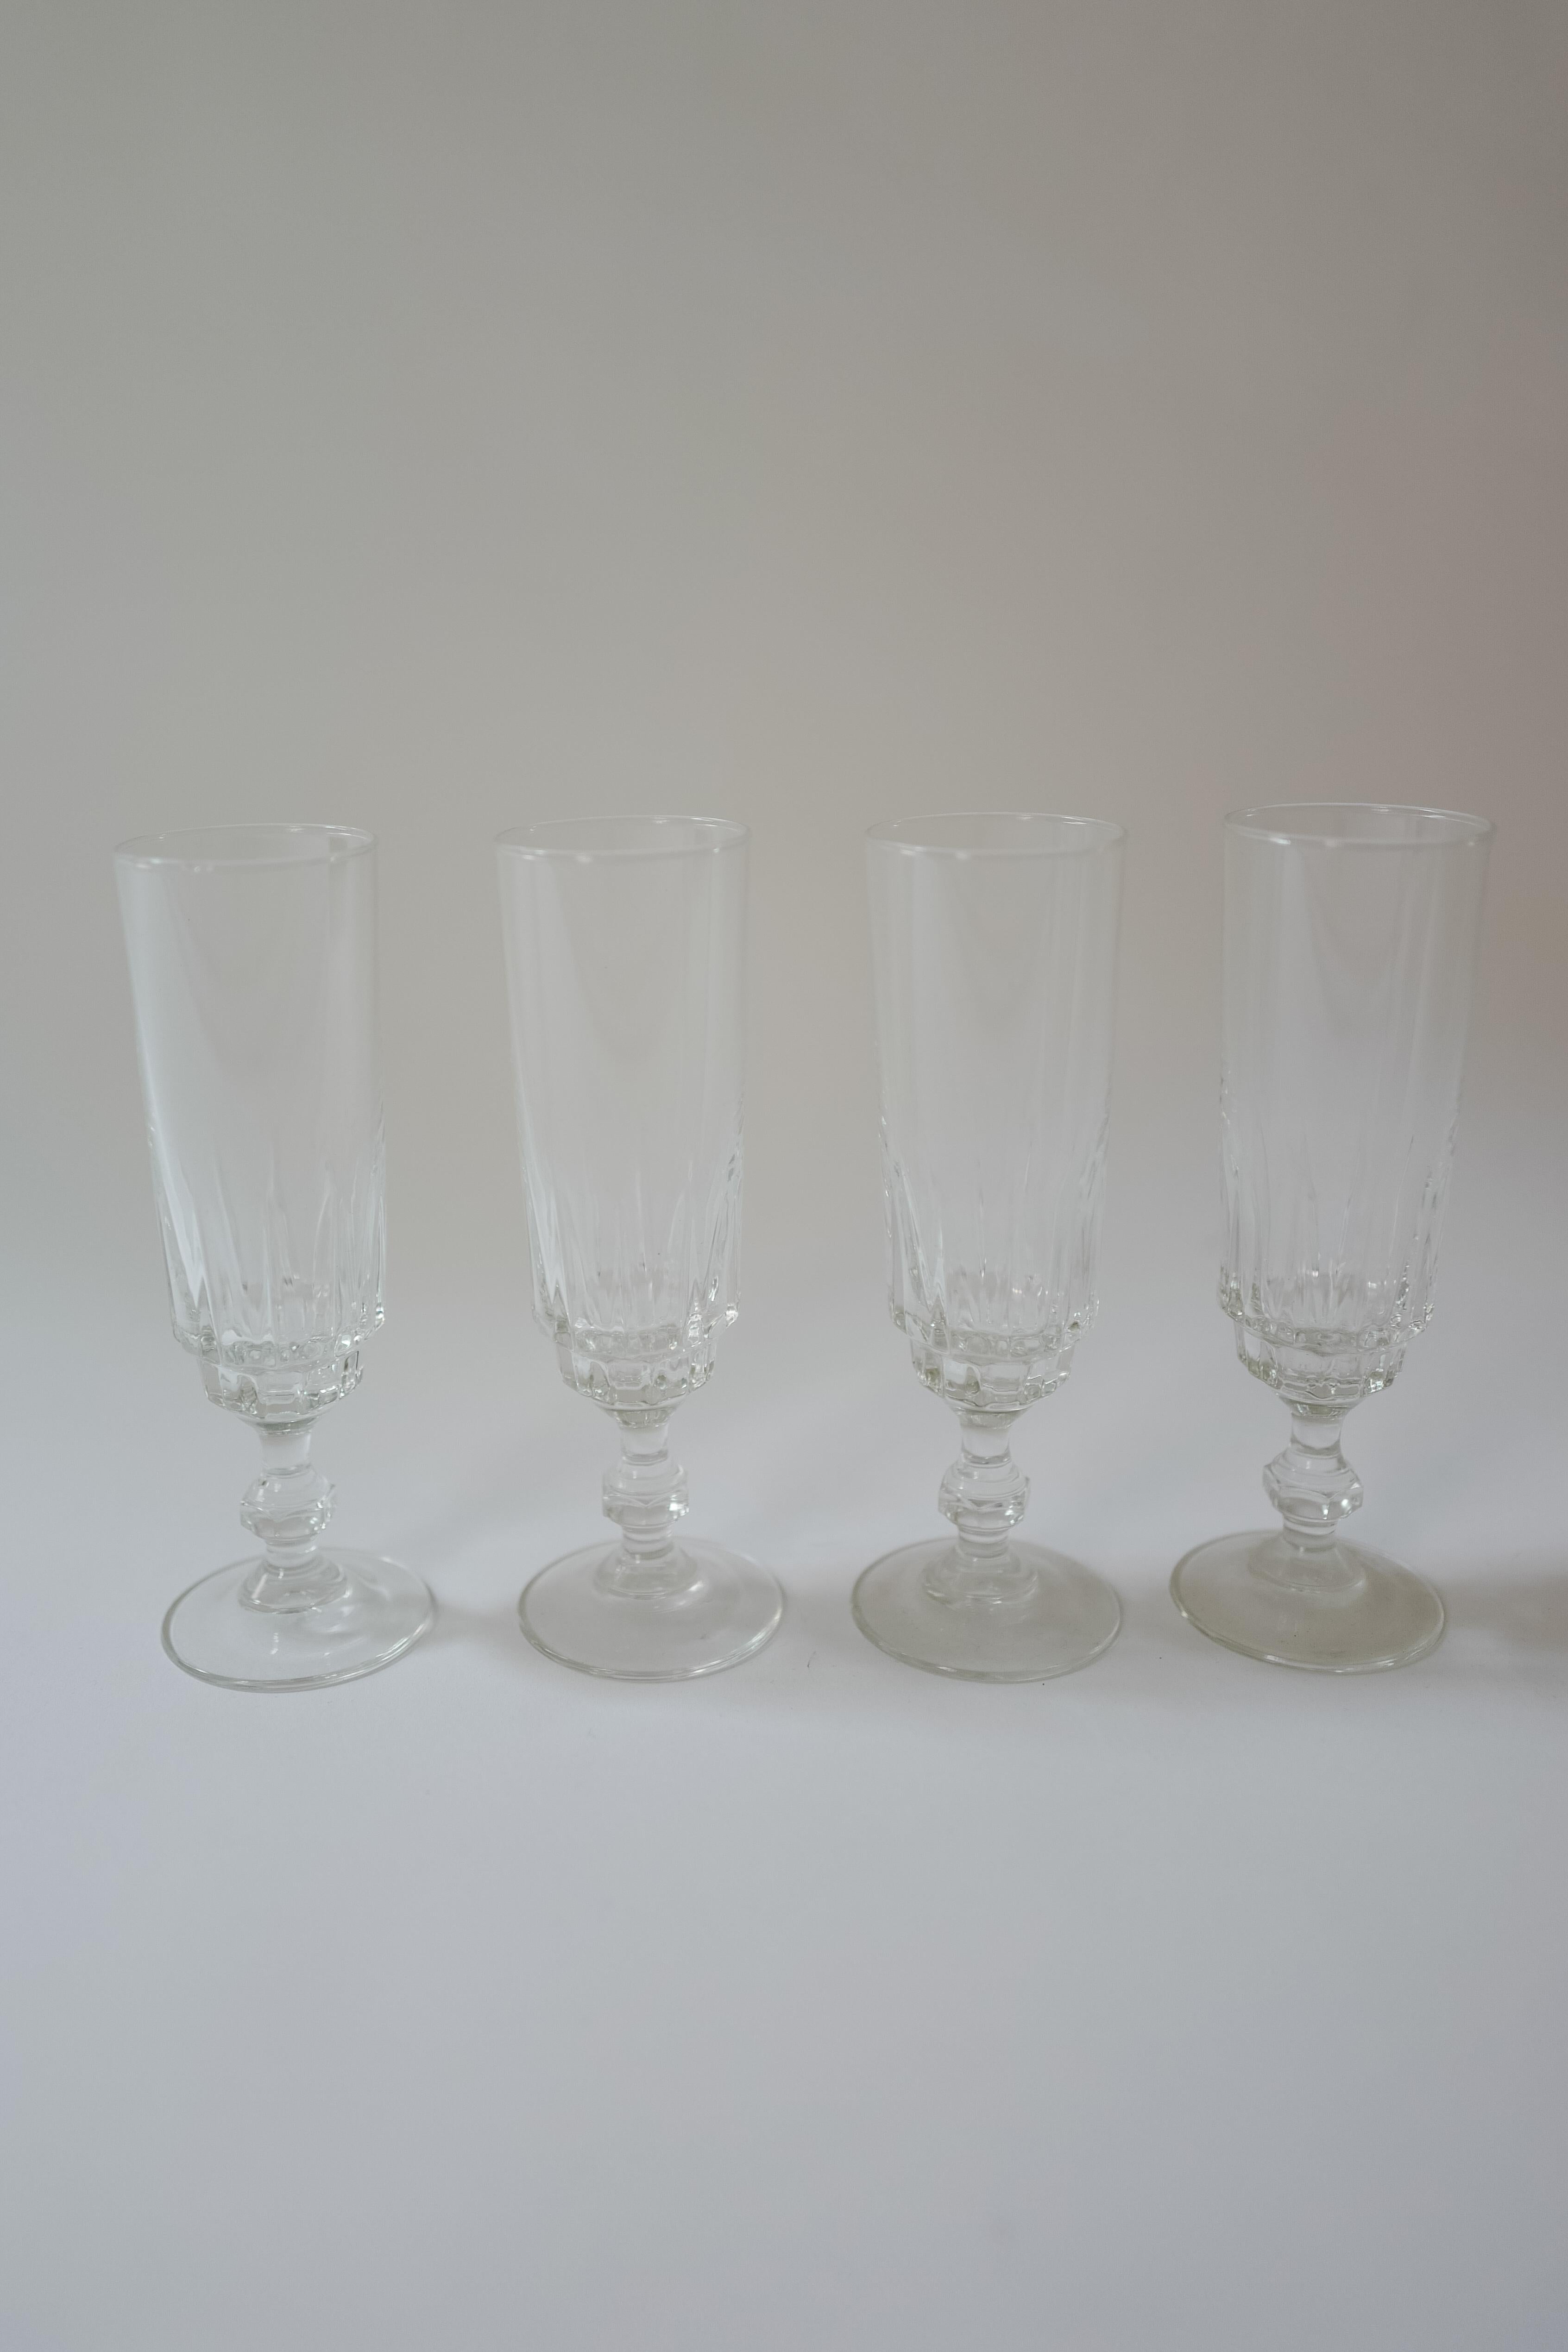 A set of four vintage crystal French glass champagne flutes. Marked France on the base of the glass. 